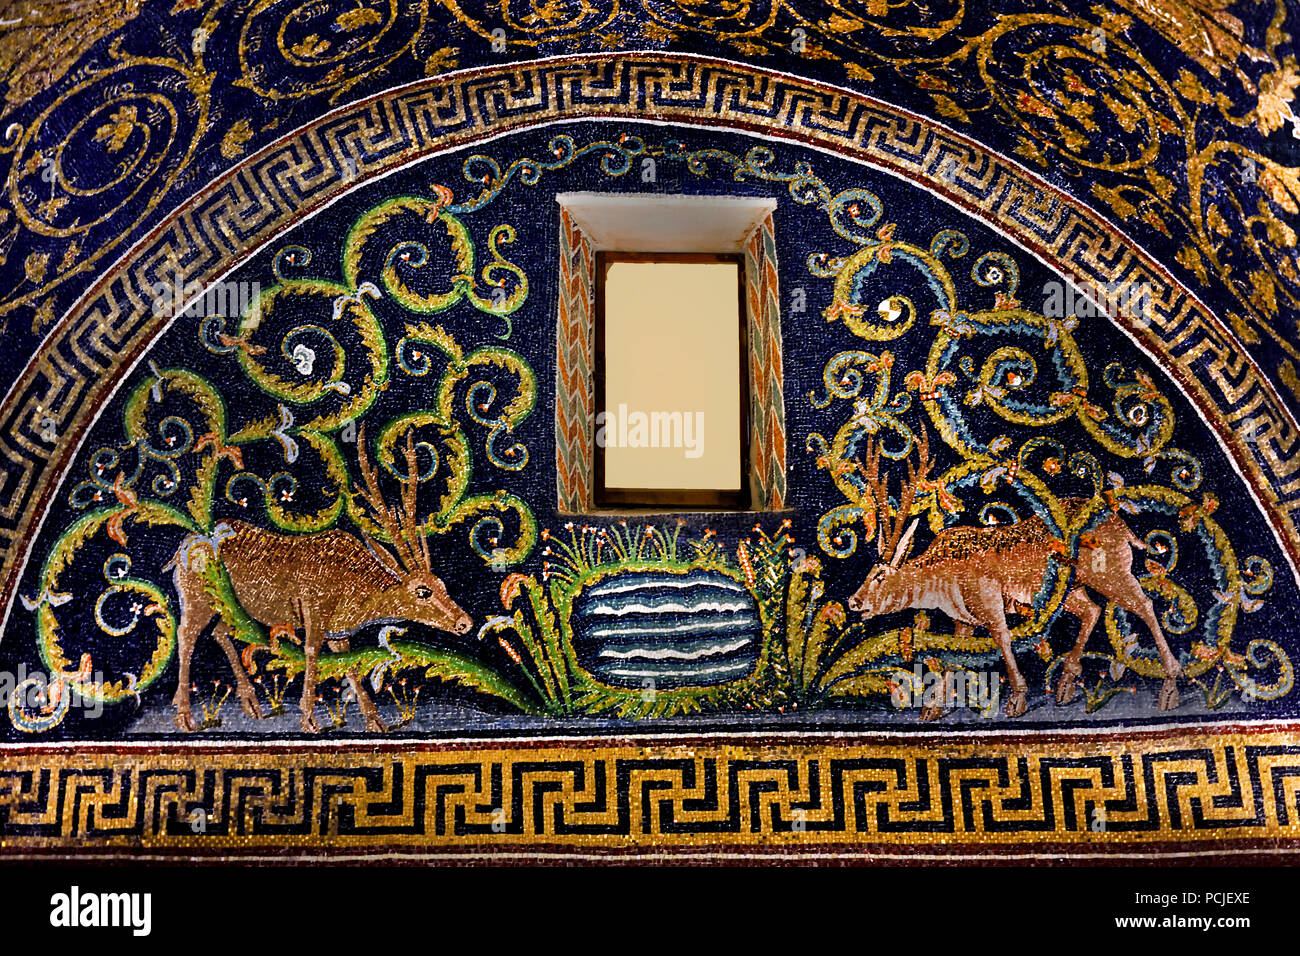 Lunette with a deerin the  Mausoleum of Galla Placidia in Ravenna(386 - 450 AD) Mosaics ( late Roman and Byzantine architecture,) Emilia-Romagna - Northern Italy. ( UNESCO World Heritage site ) Stock Photo